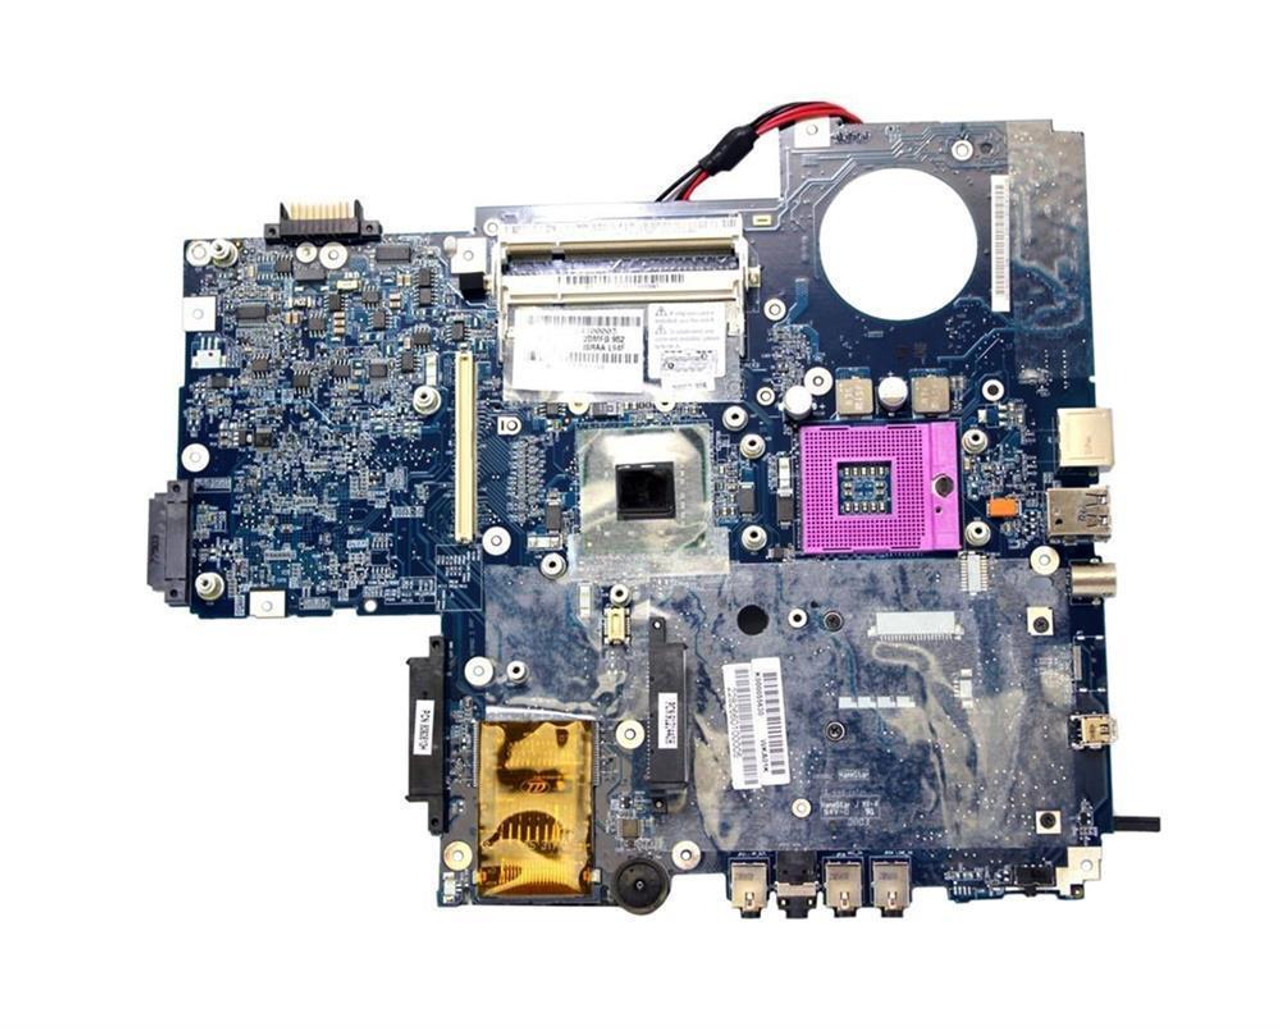 K000049250 Toshiba System Board (Motherboard) for Satellite Pro P200 P205 (Refurbished)